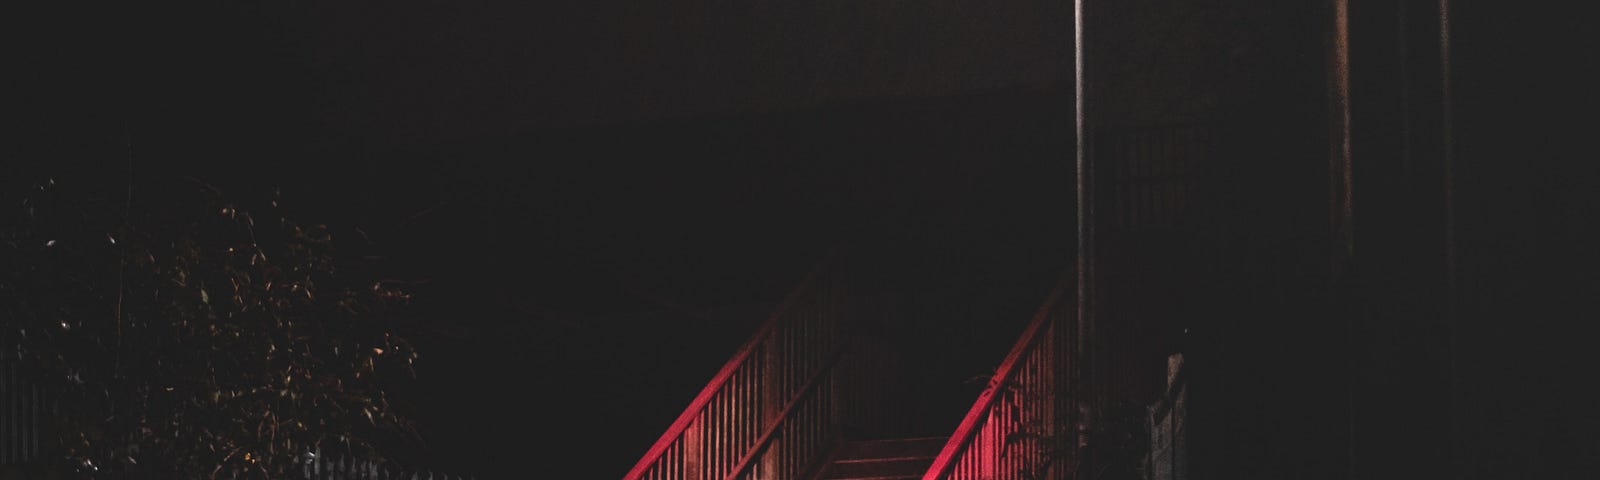 A stairway with red railings, illuminated by a street lamp at night while it’s raining.